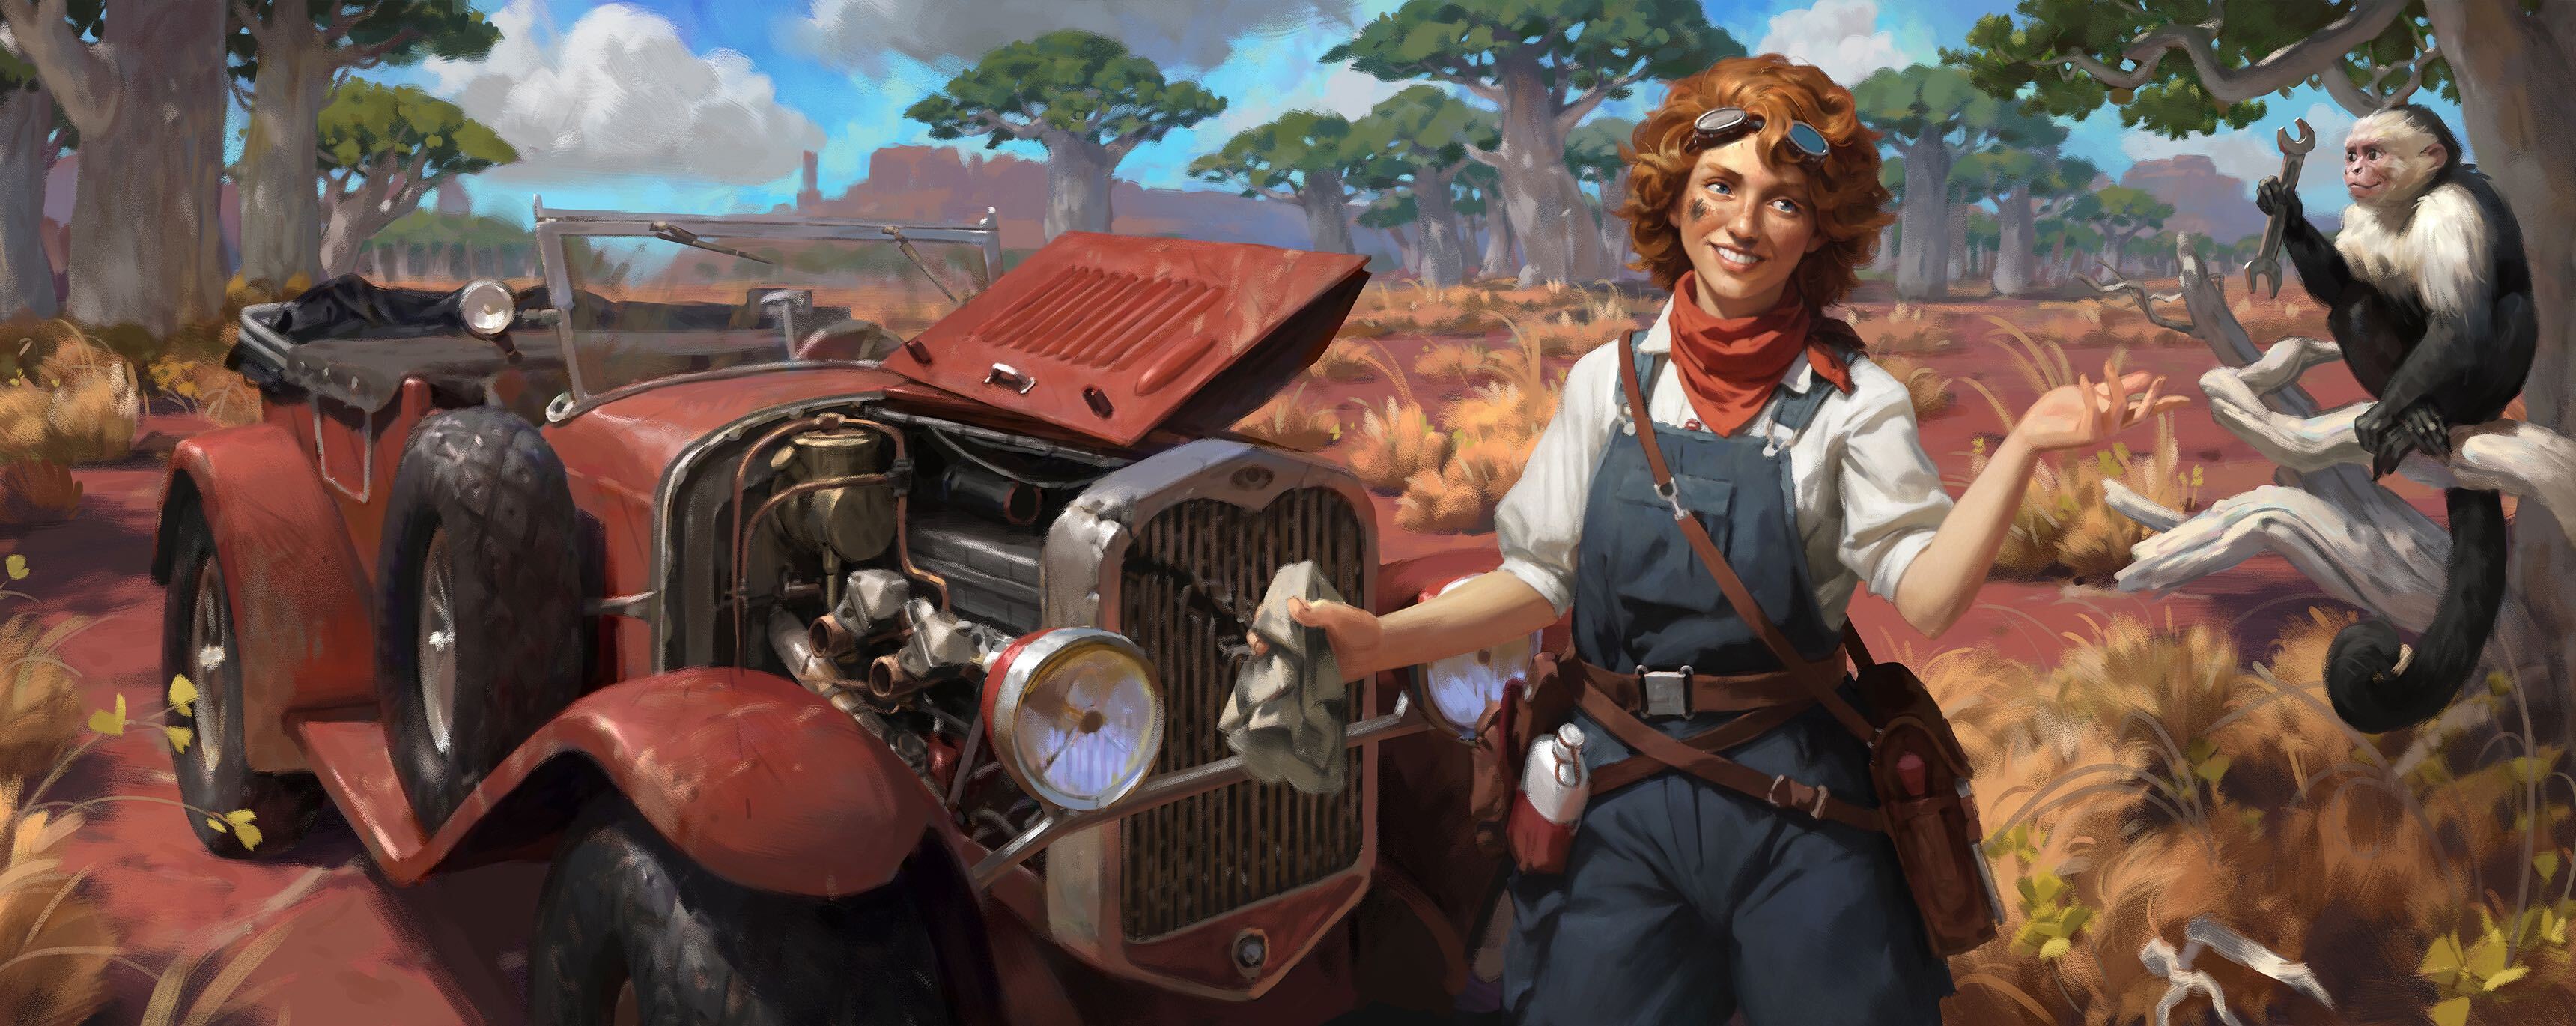 The Missing Expedition Mechanic art